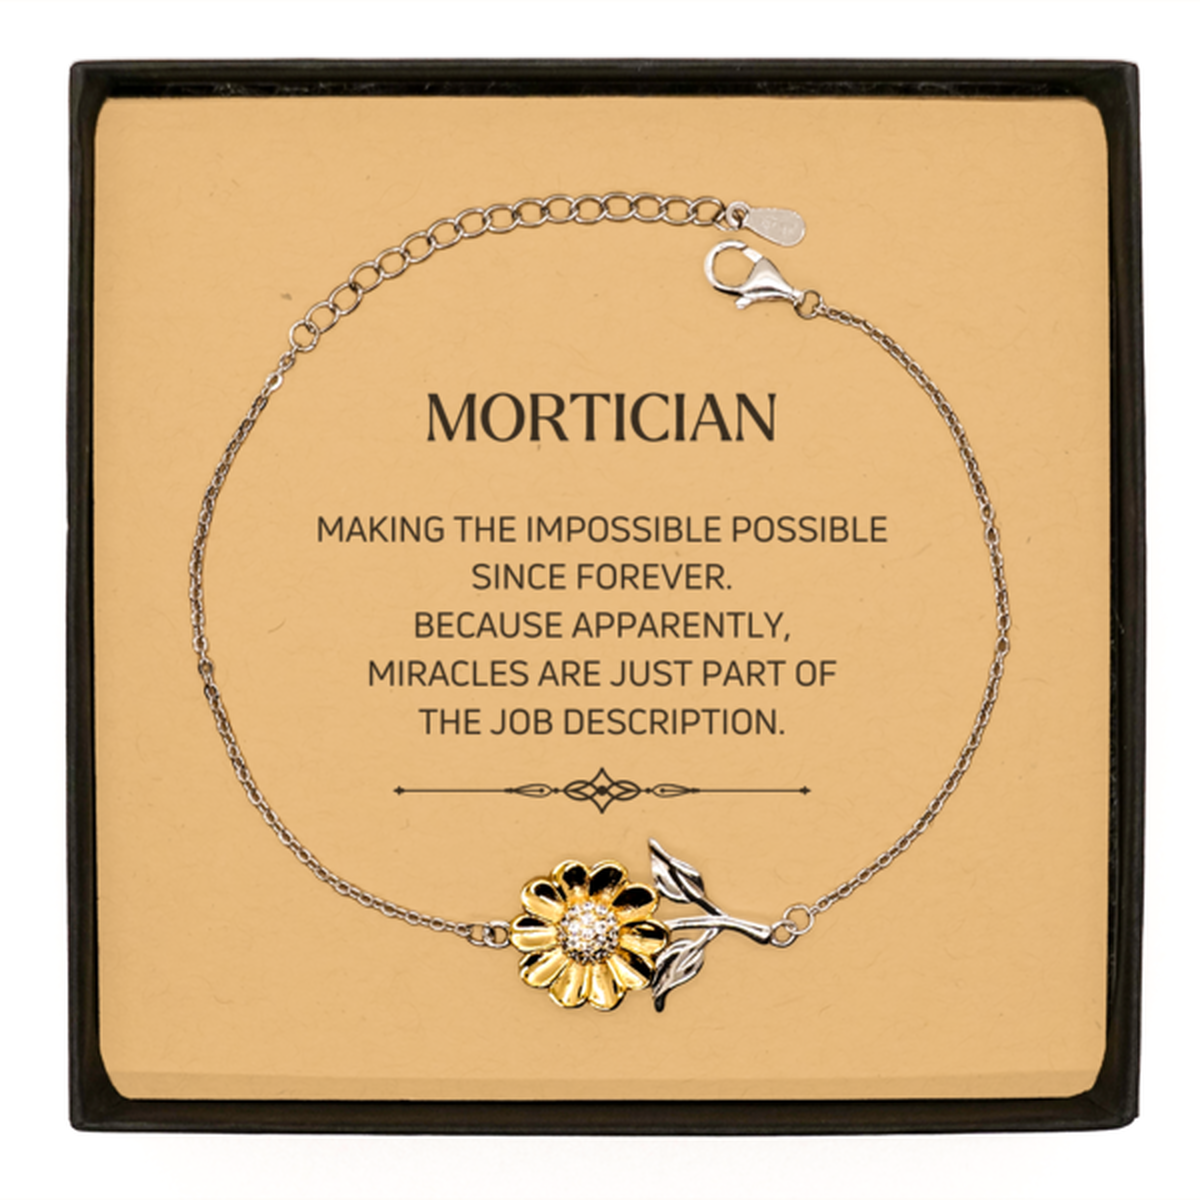 Funny Mortician Gifts, Miracles are just part of the job description, Inspirational Birthday Sunflower Bracelet For Mortician, Men, Women, Coworkers, Friends, Boss